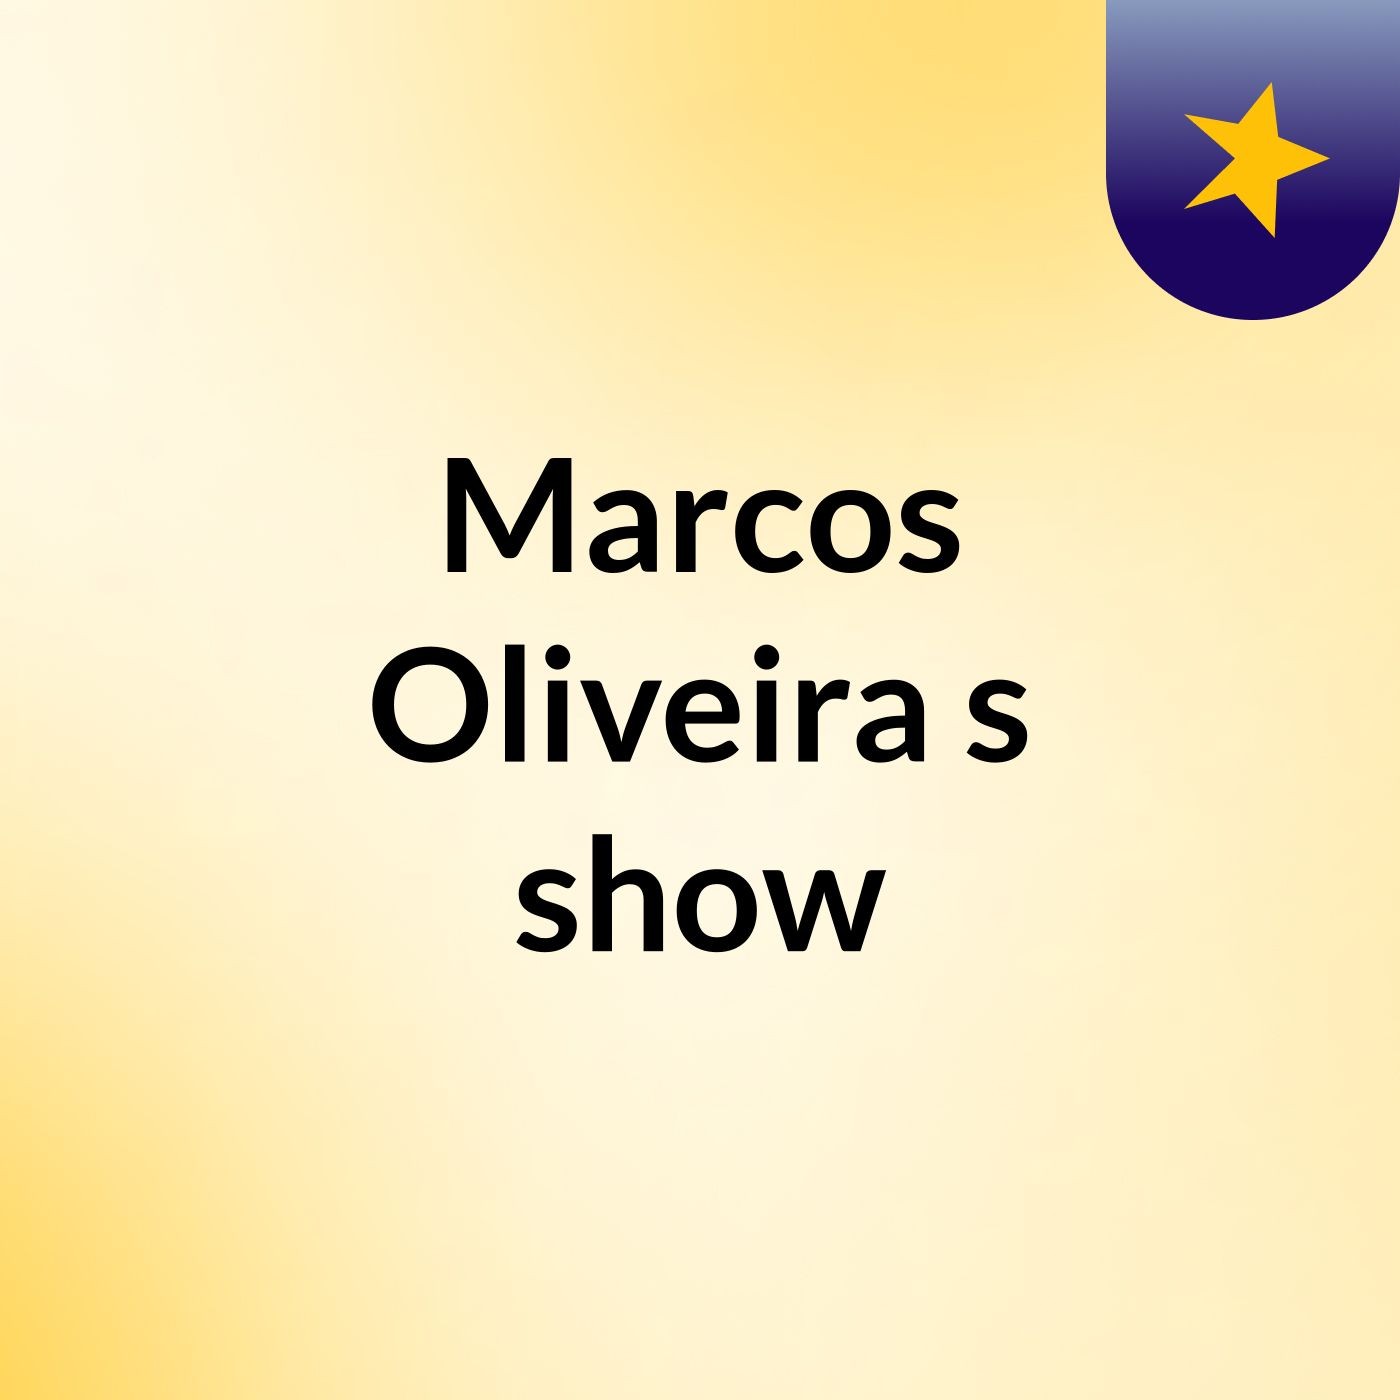 Marcos Oliveira's show